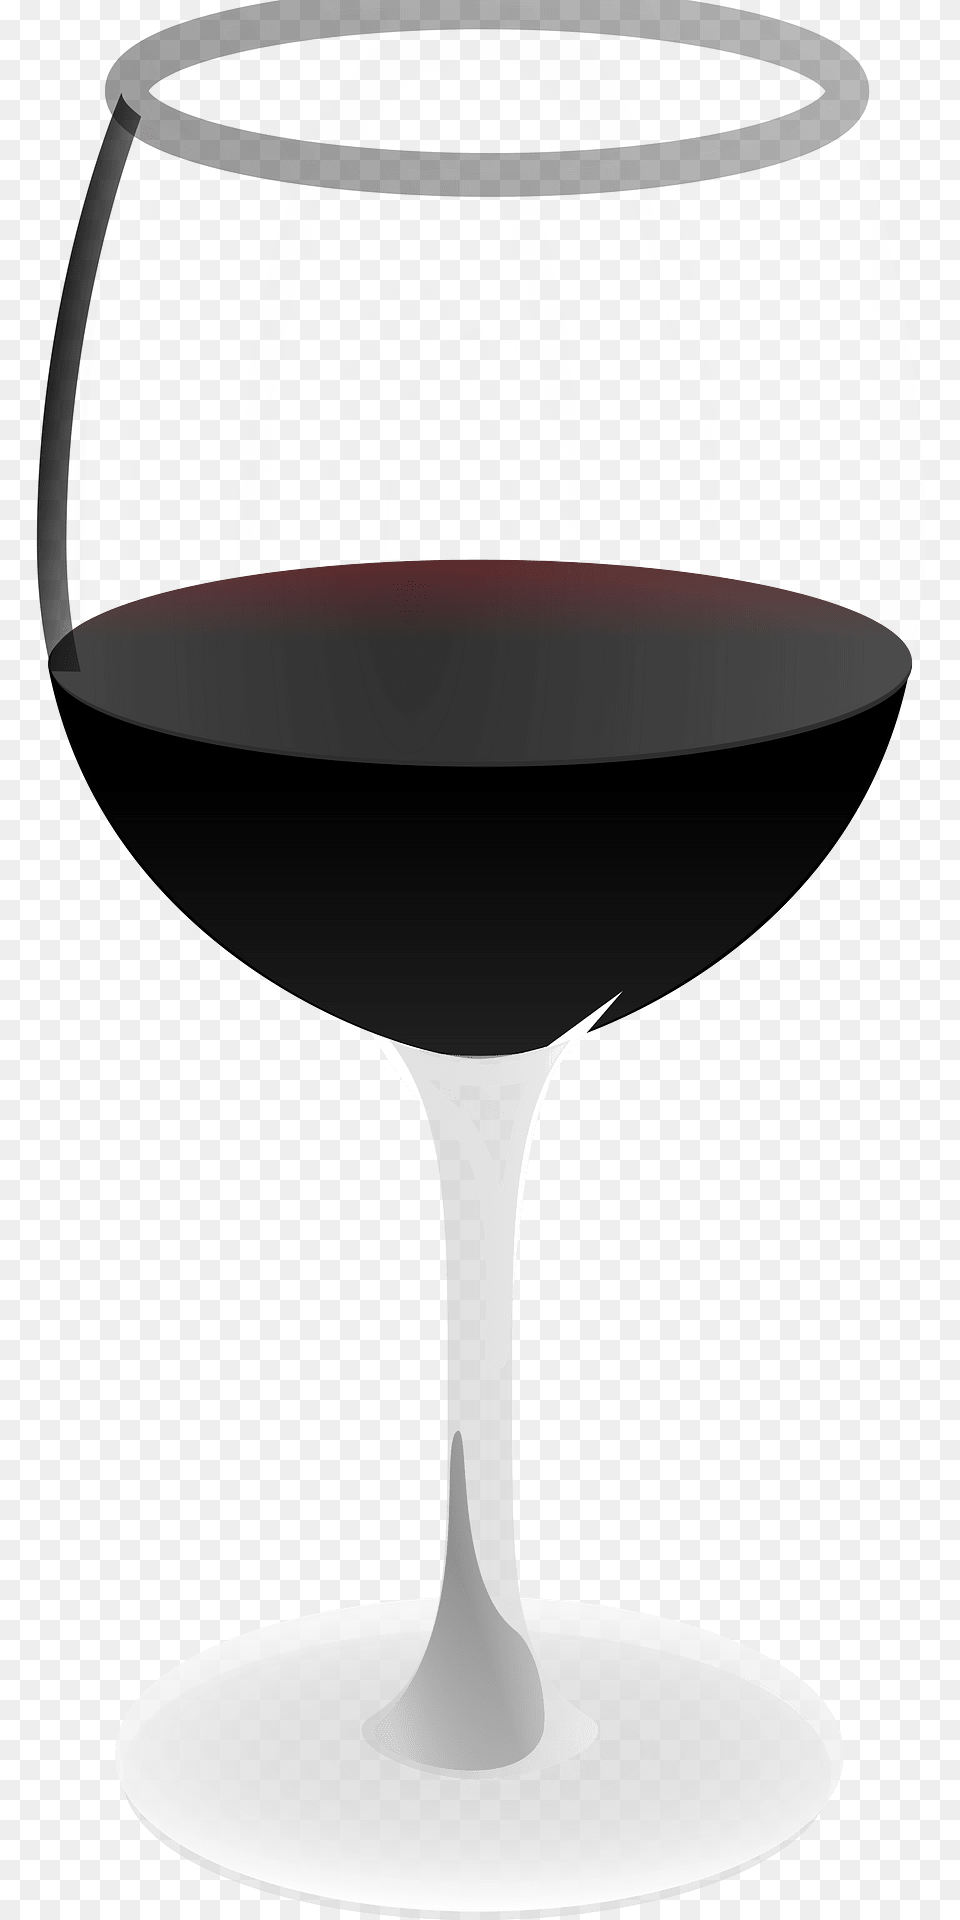 Wine Glass Clipart, Alcohol, Beverage, Liquor, Red Wine Png